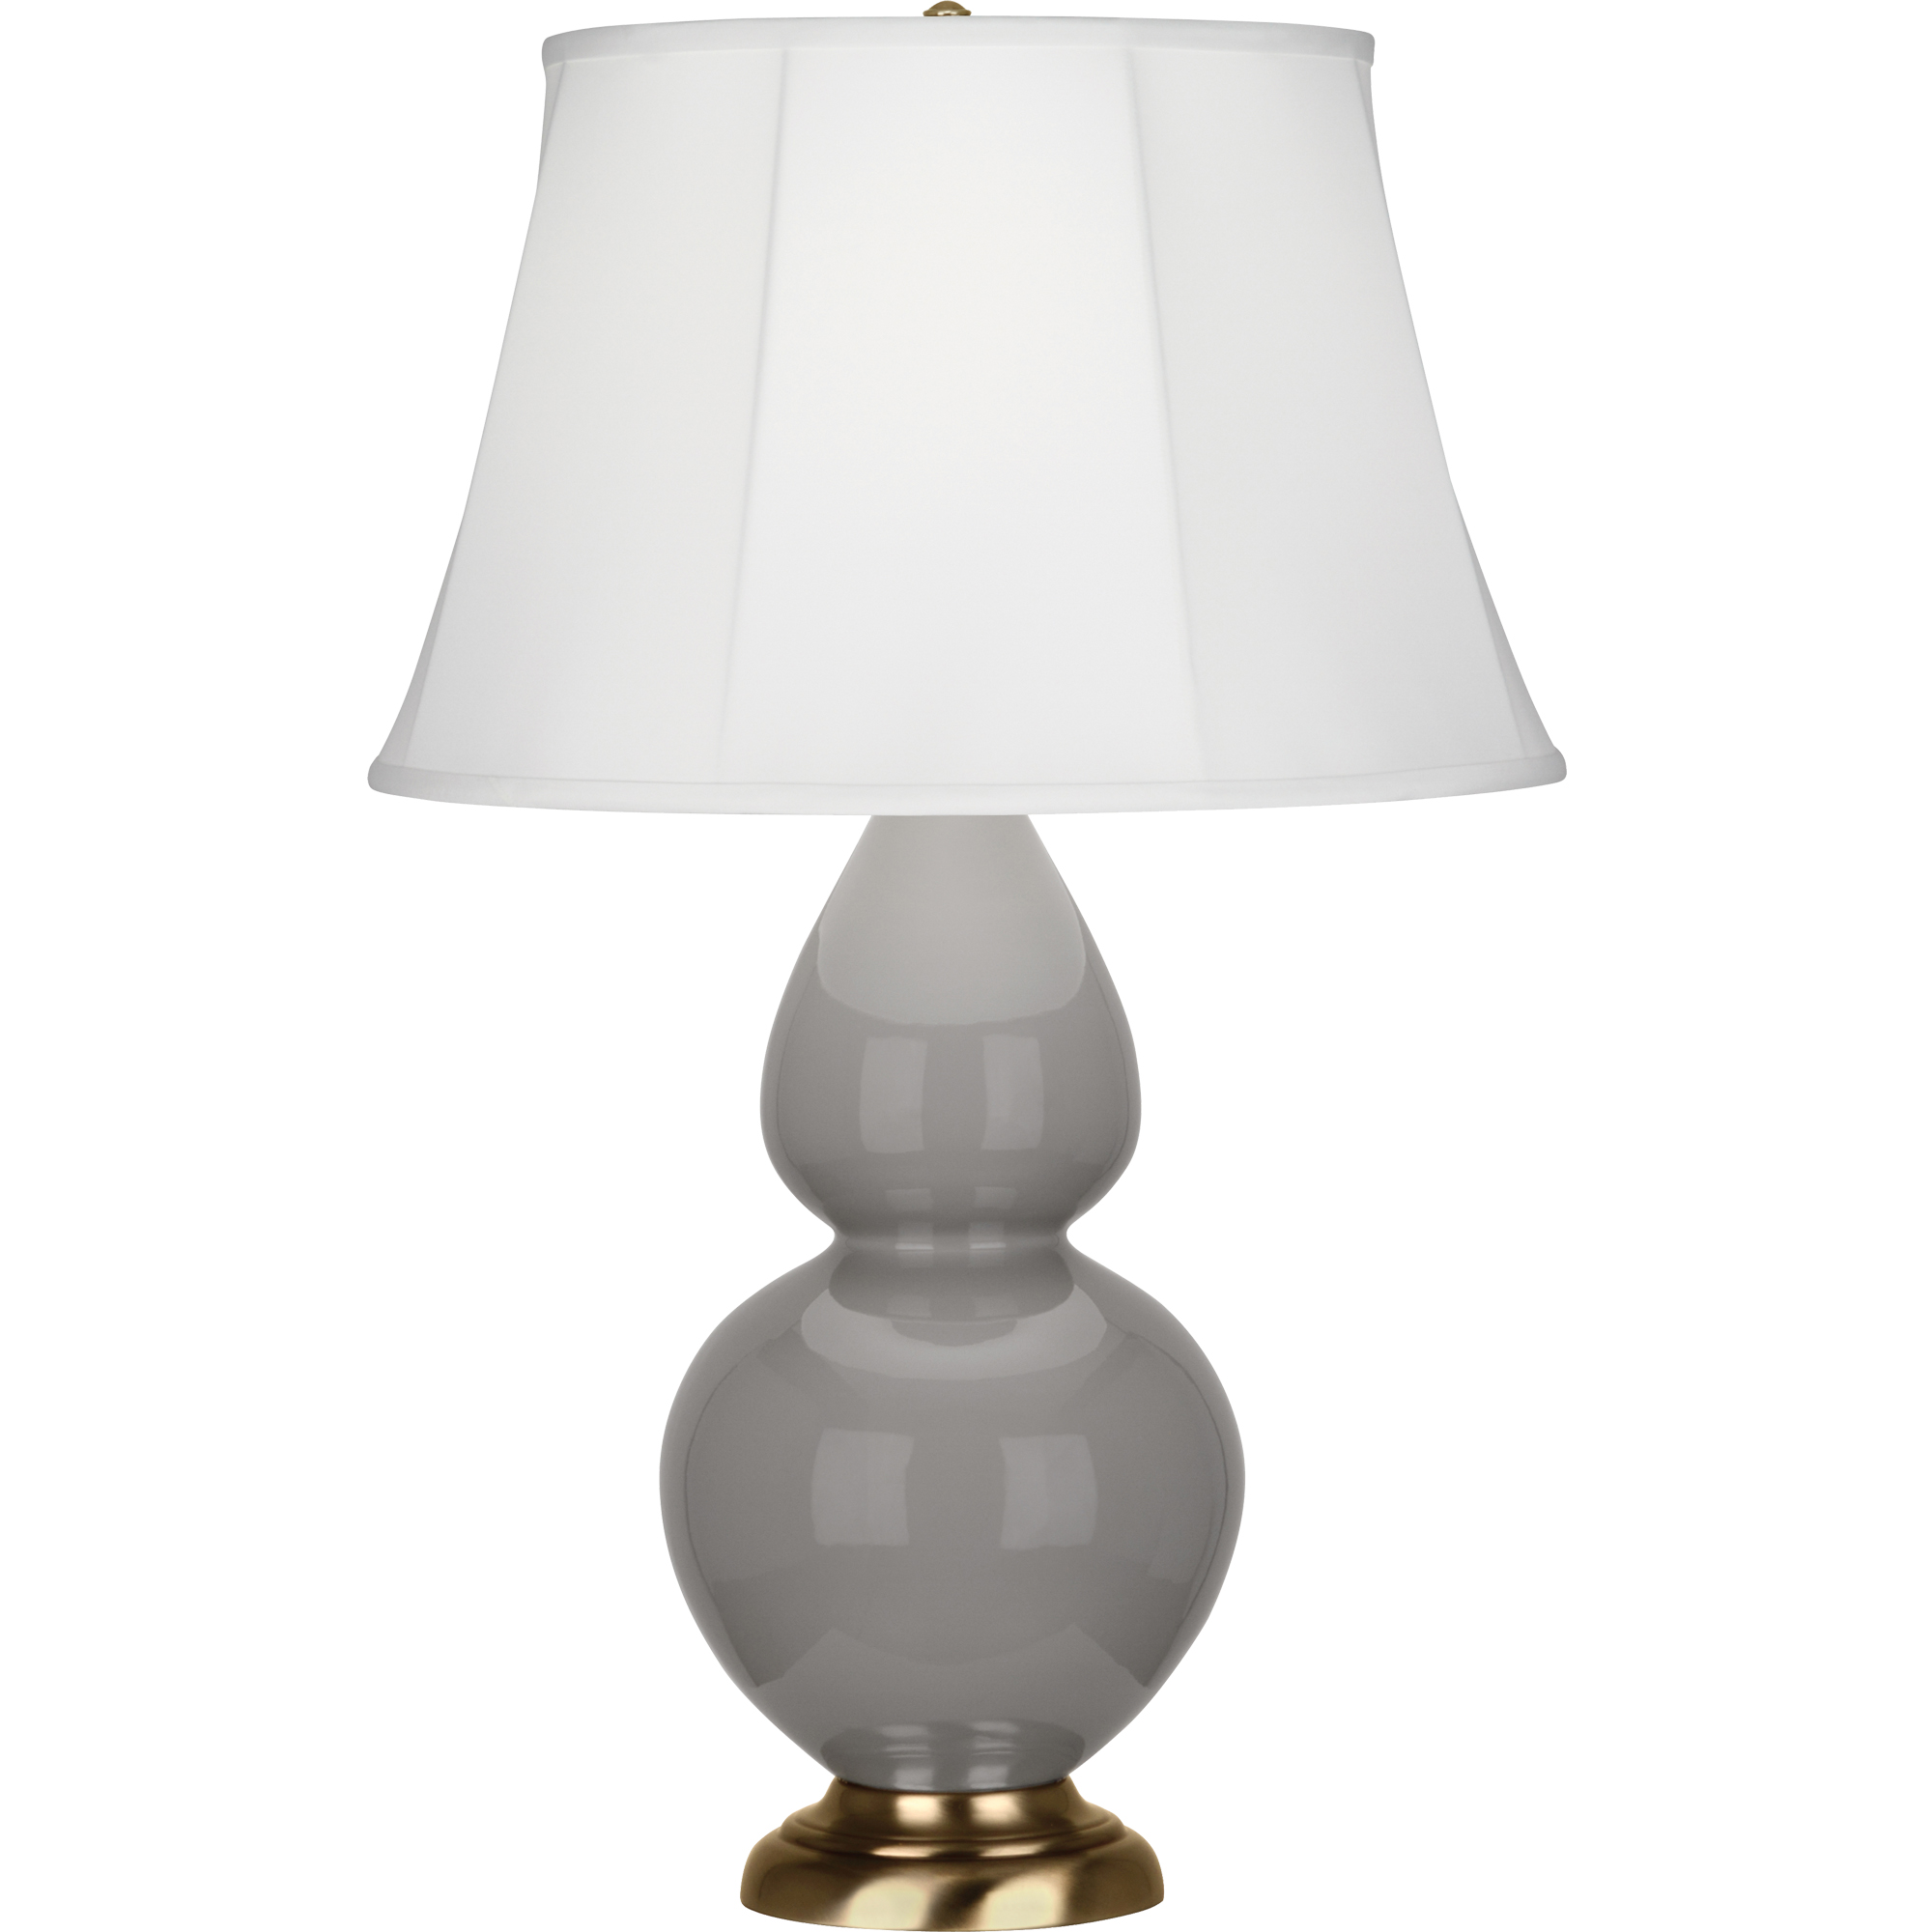 Double Gourd Table Lamp Style #1748